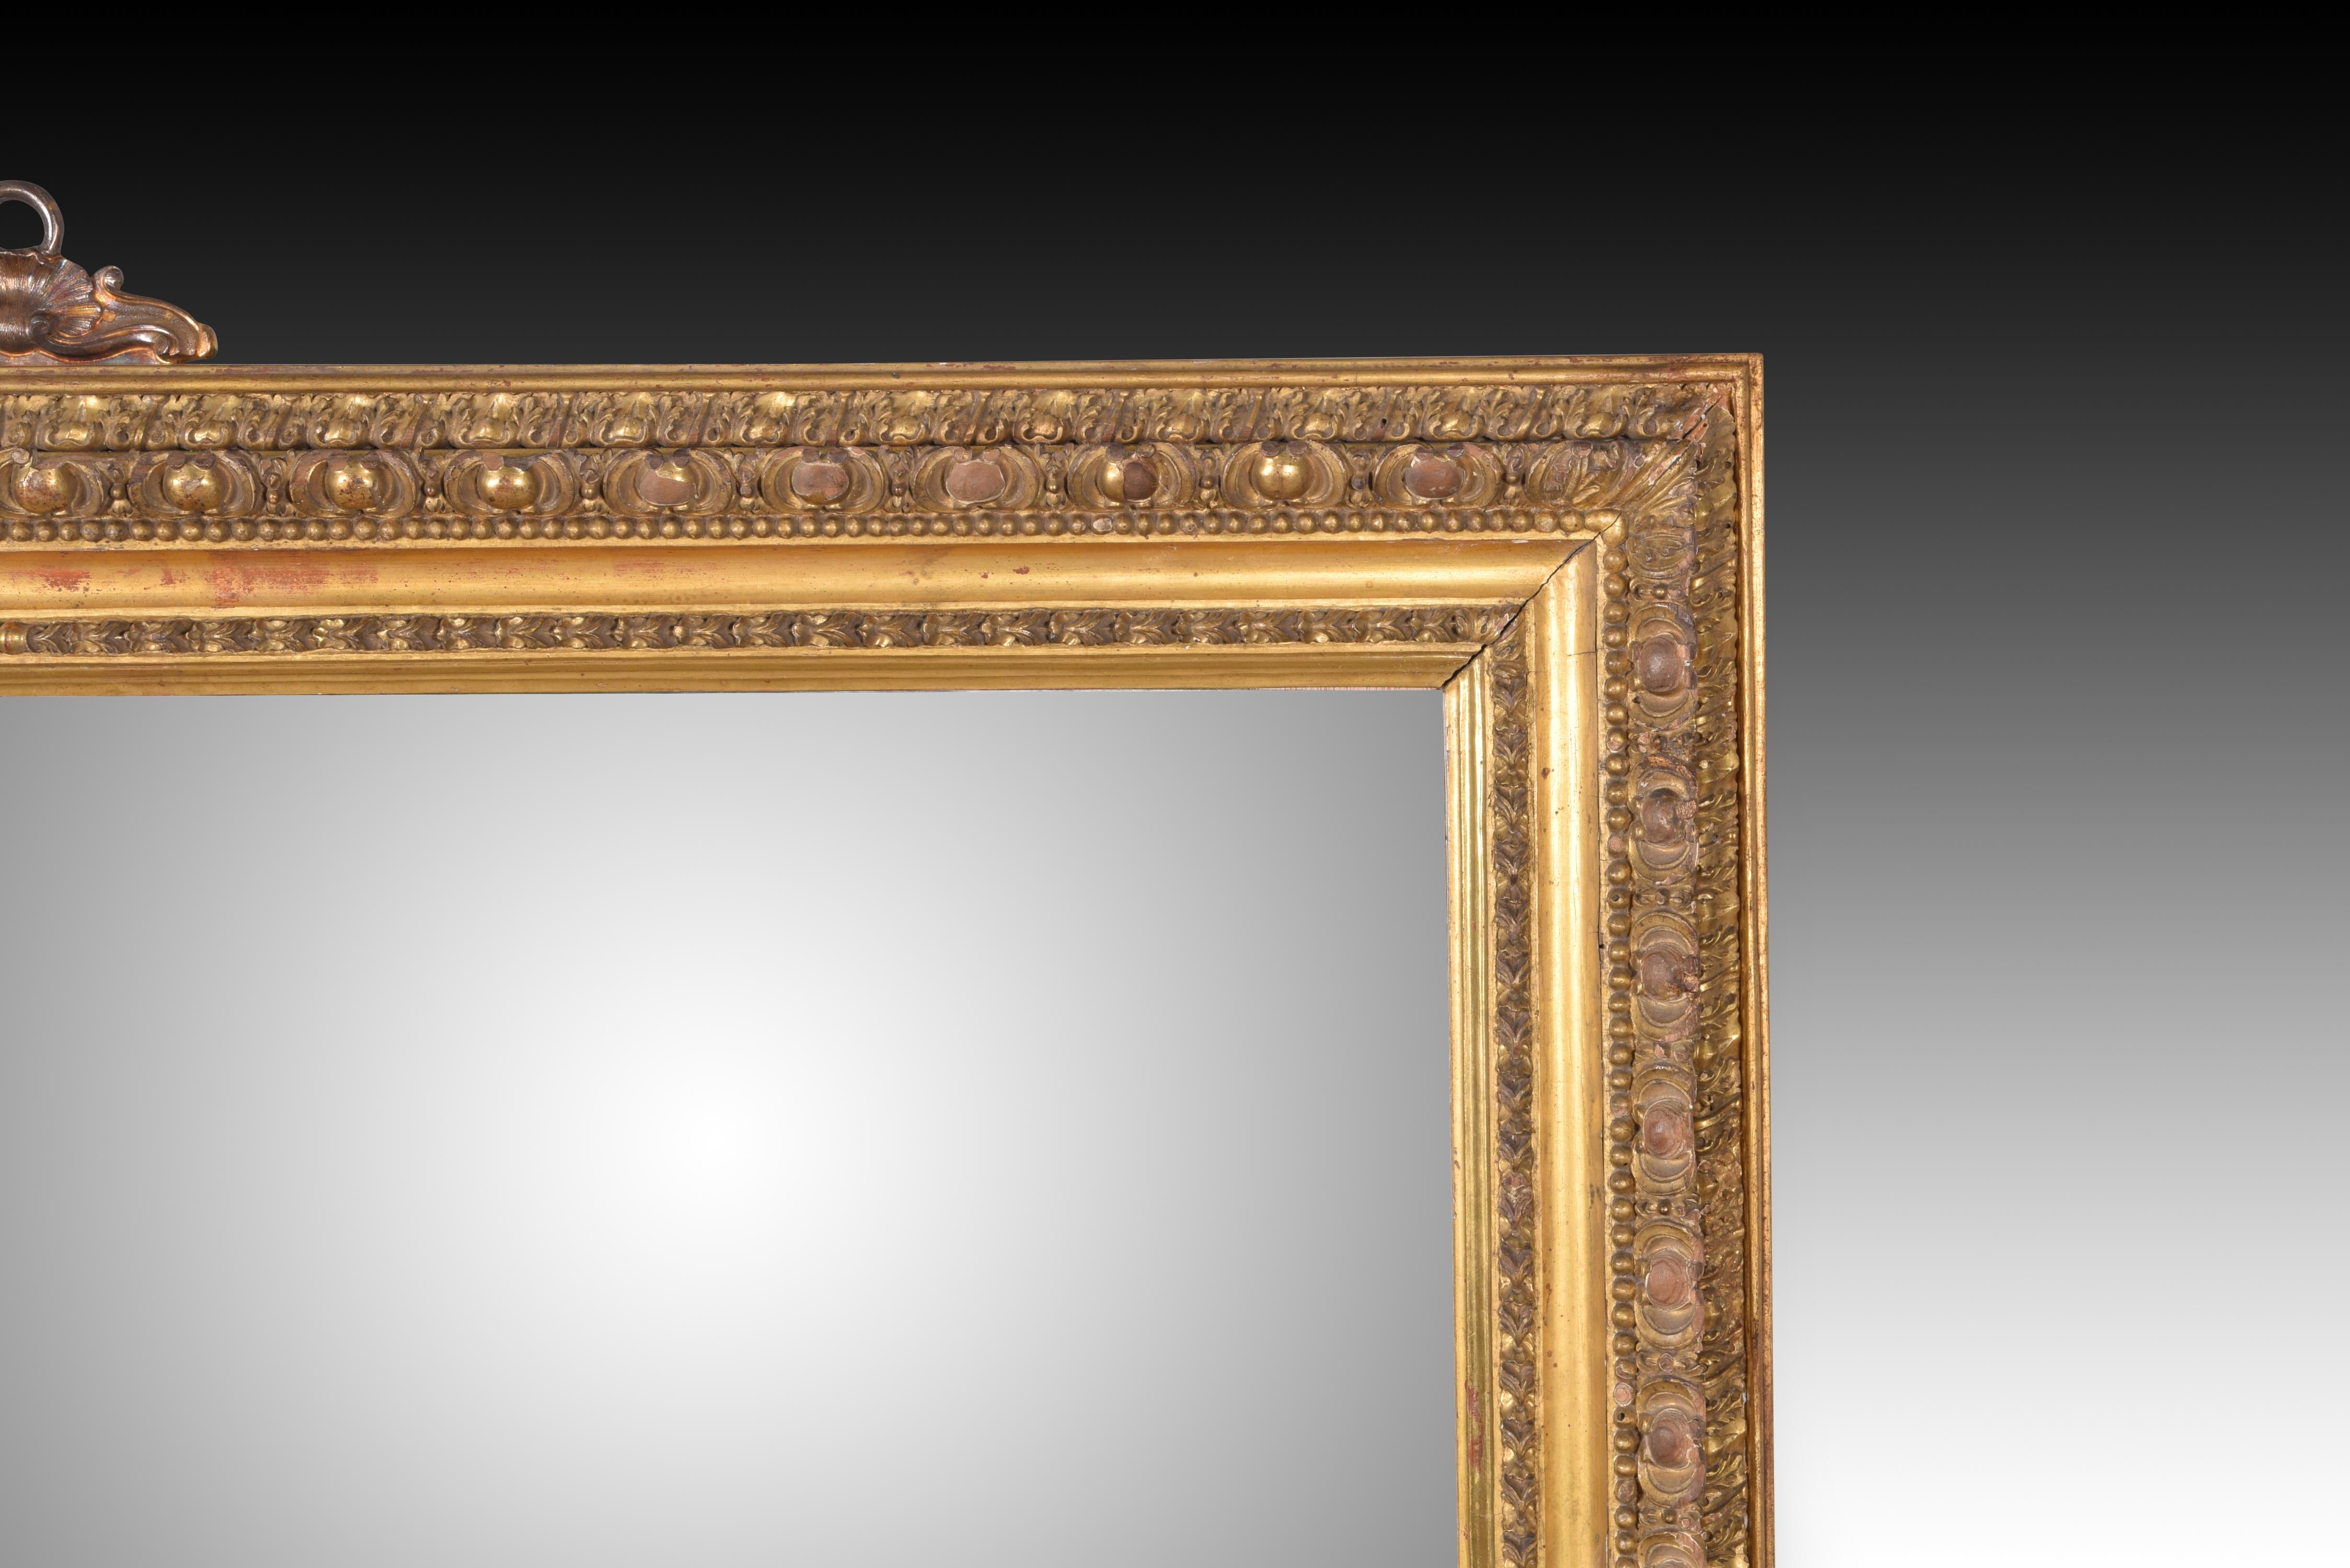 Mirror. Carved wood. 20th century, following 19th century models. 
Wall mirror with decorative elements inside and outside the glass space, finished with a cape. All these decorative details, as well as the shape, are inspired by 19th century models